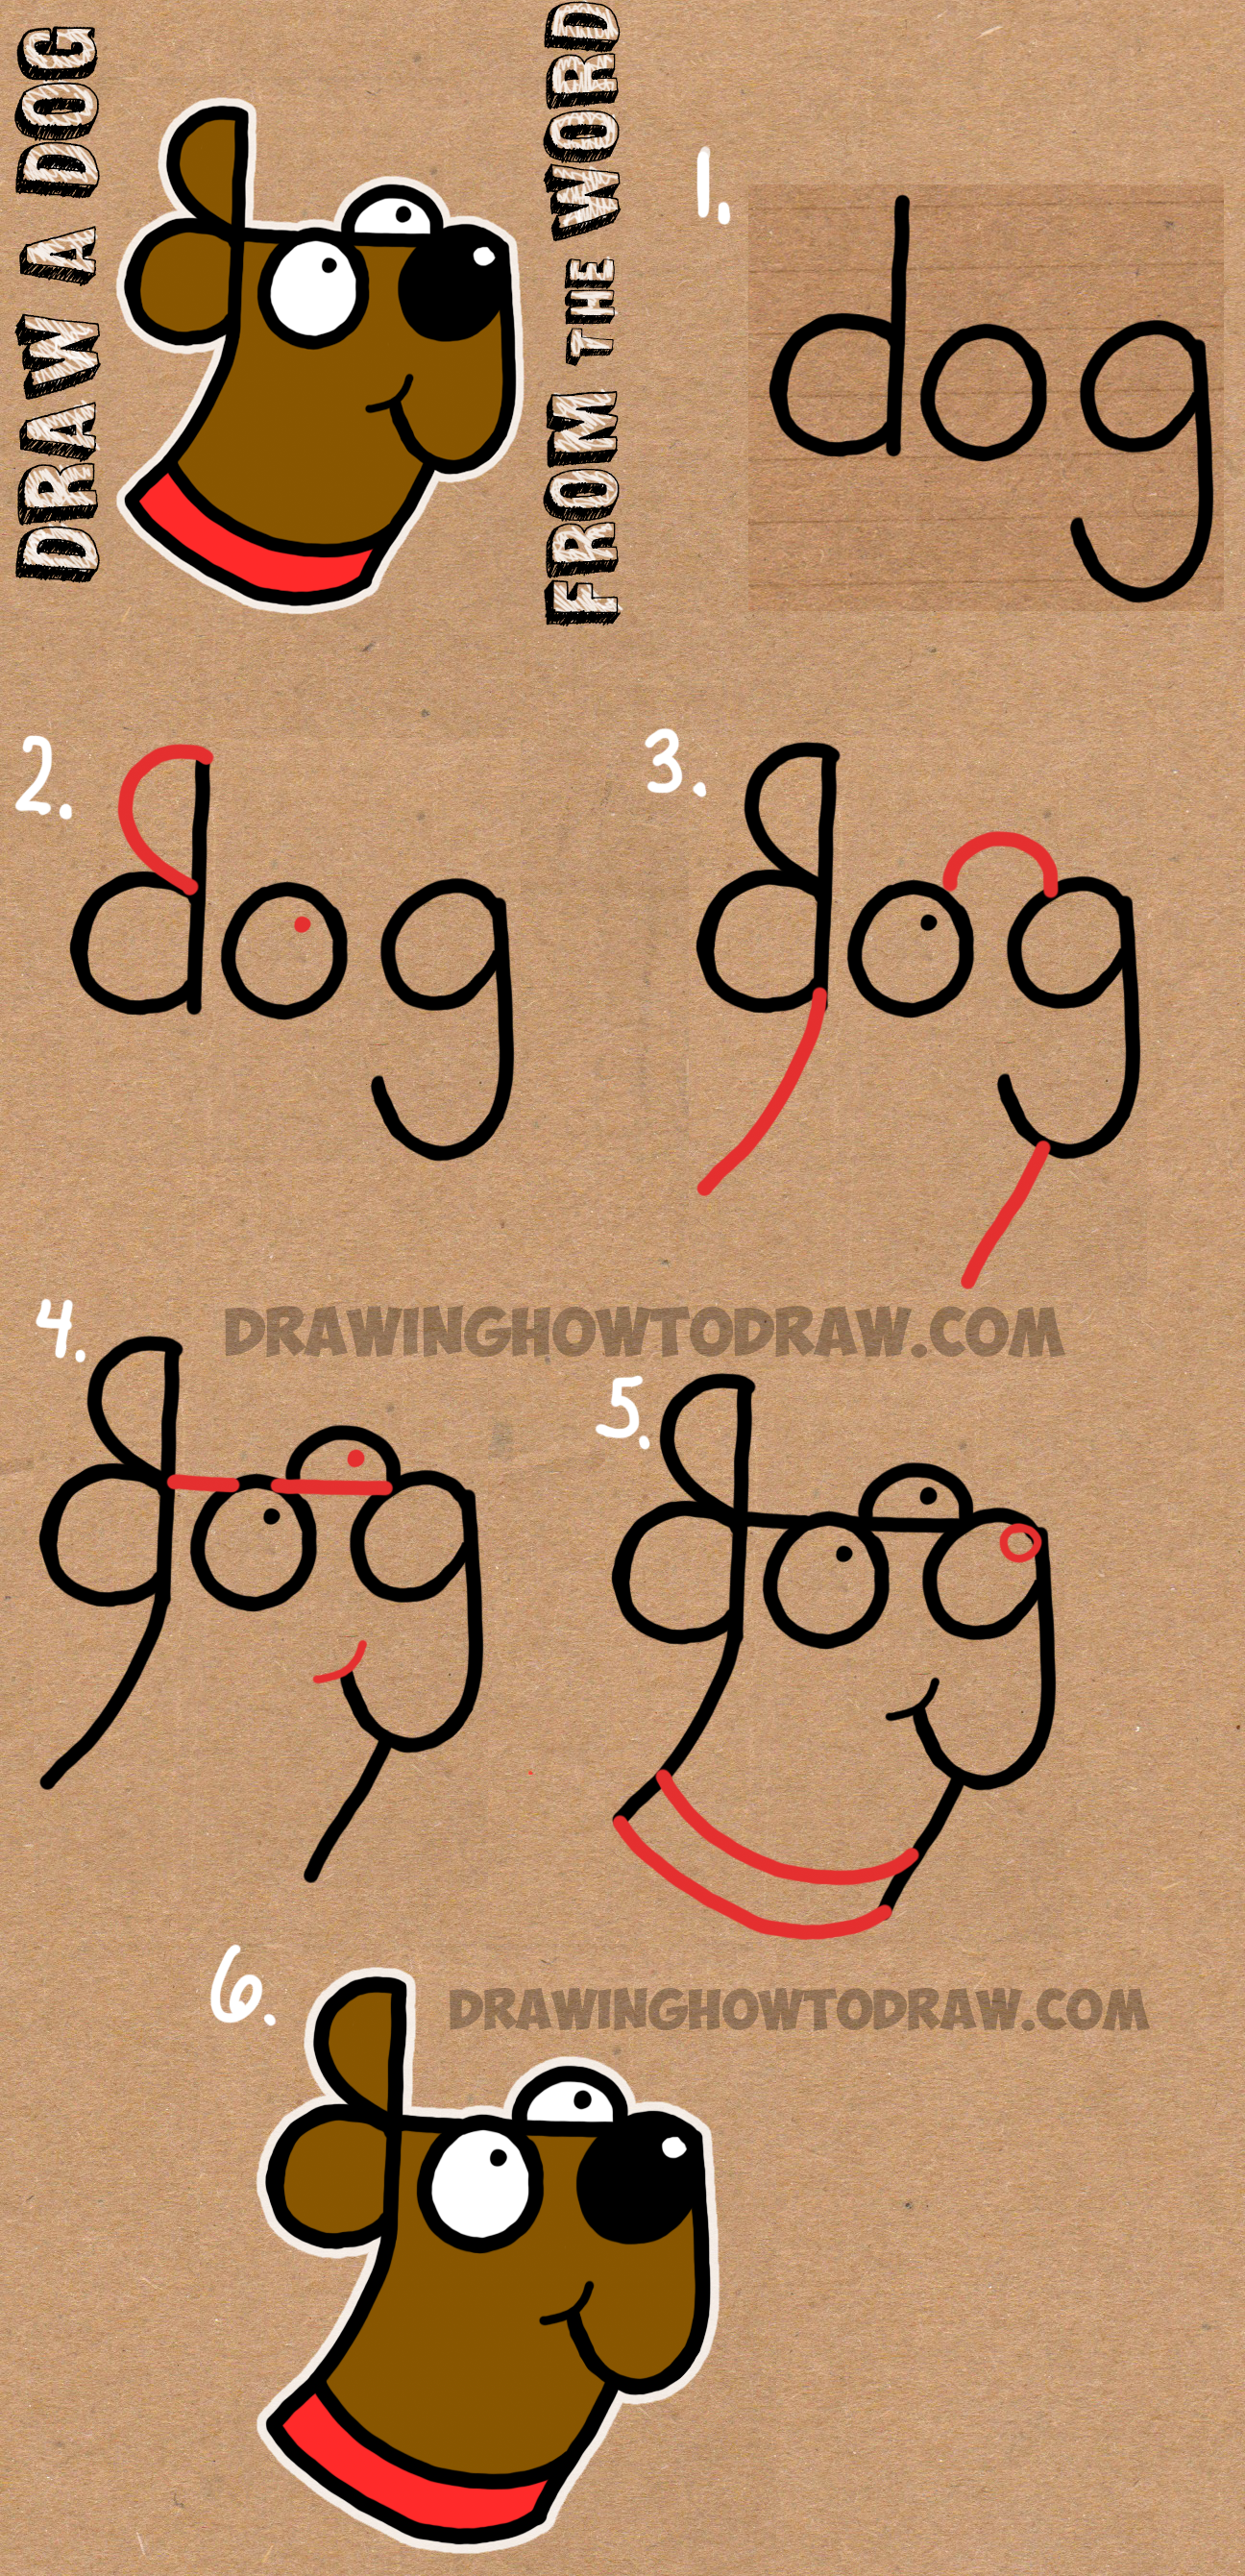 How to Draw a Dog from The Word Dog  Easy Step by Step Drawing Tutorial for Kids  How to Draw 